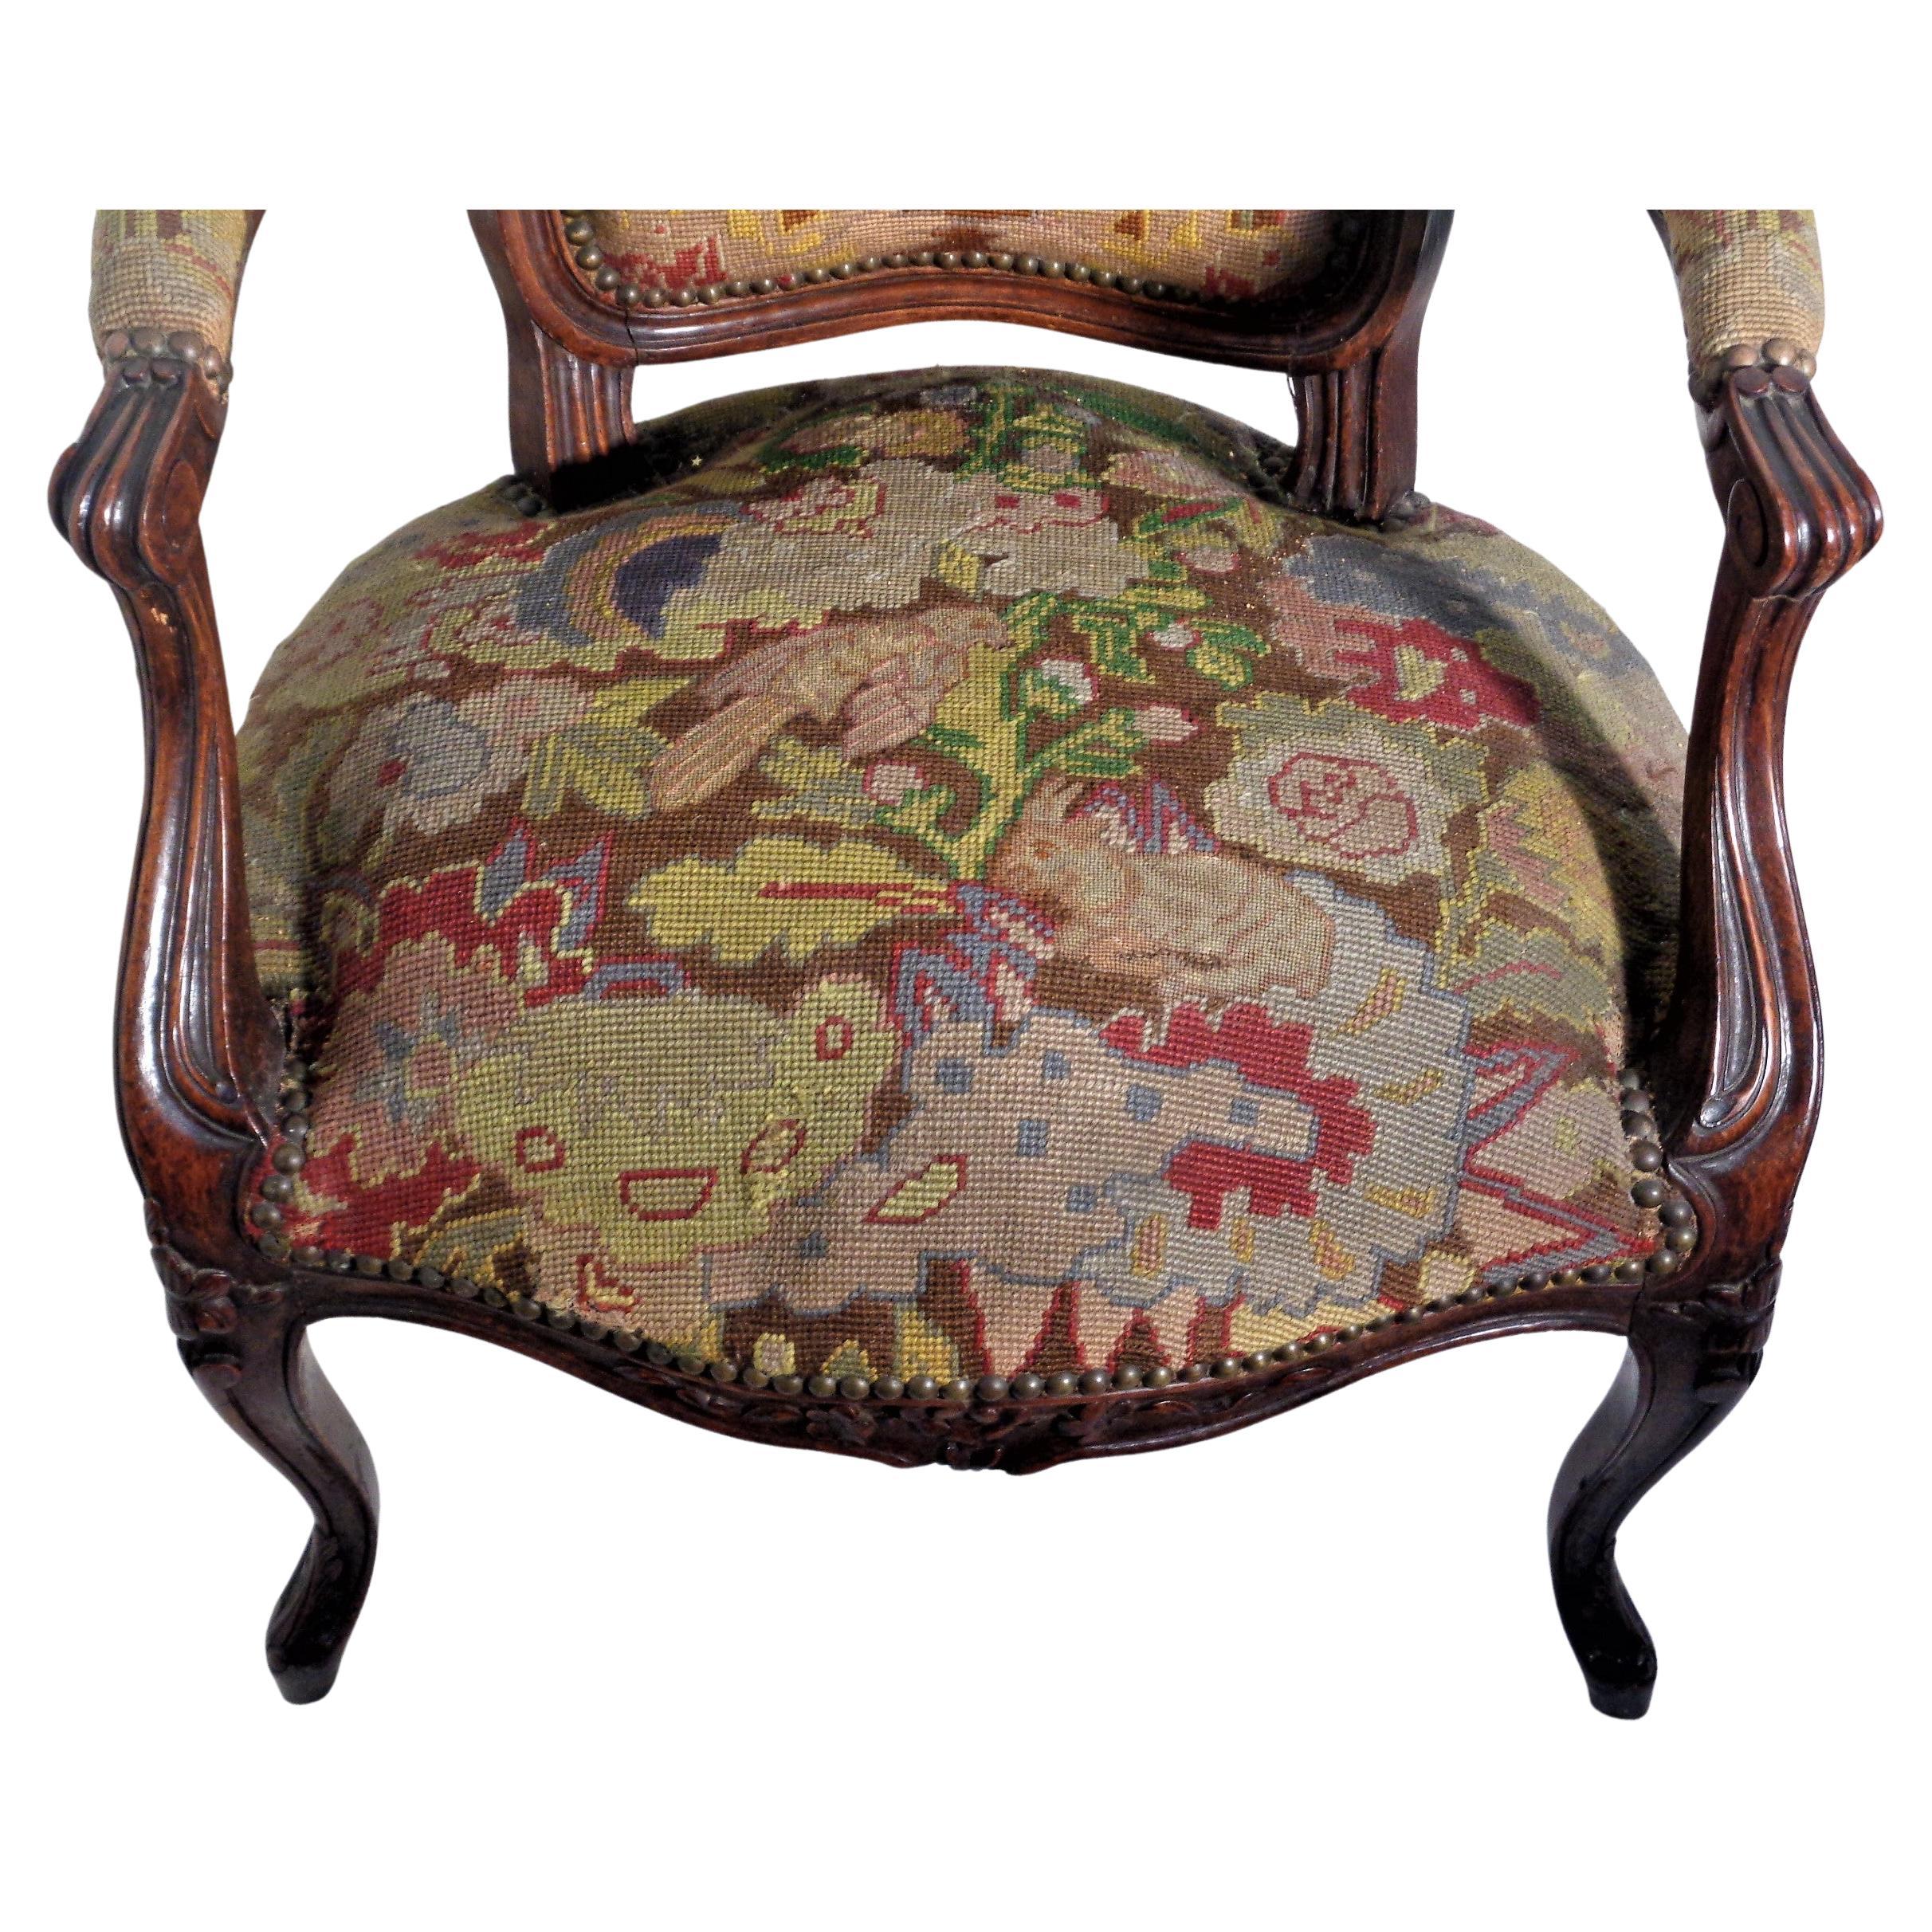 19th Century Louis XV Style Carved Beech Wood Fauteuil Grospoint Tapestry In Good Condition For Sale In Rochester, NY